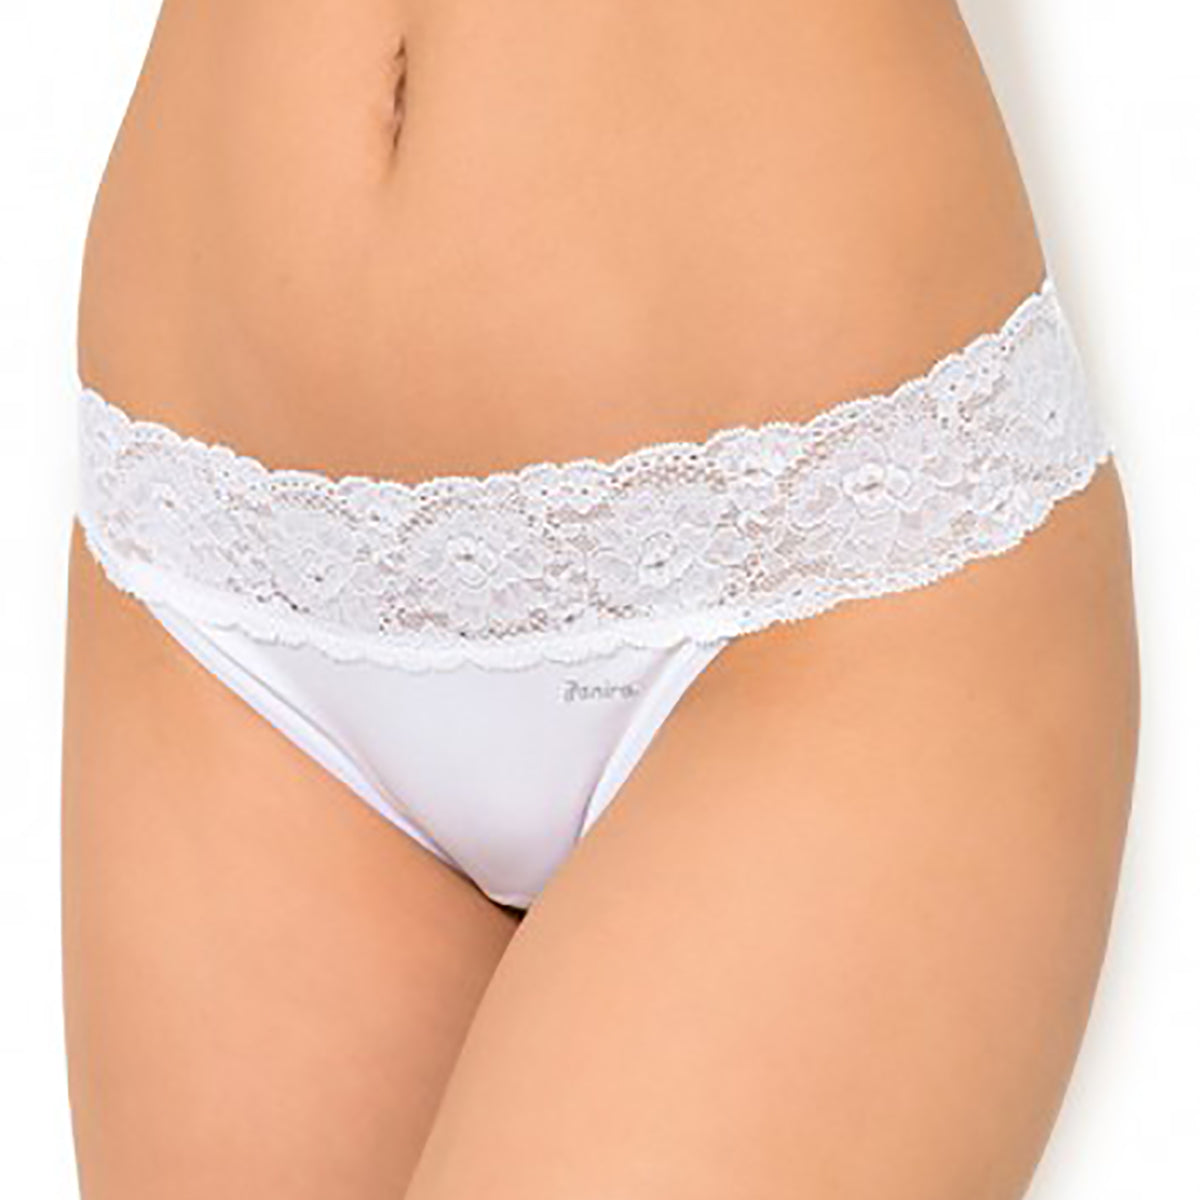 Dominique French lace bikini panties briefs in Ivory –